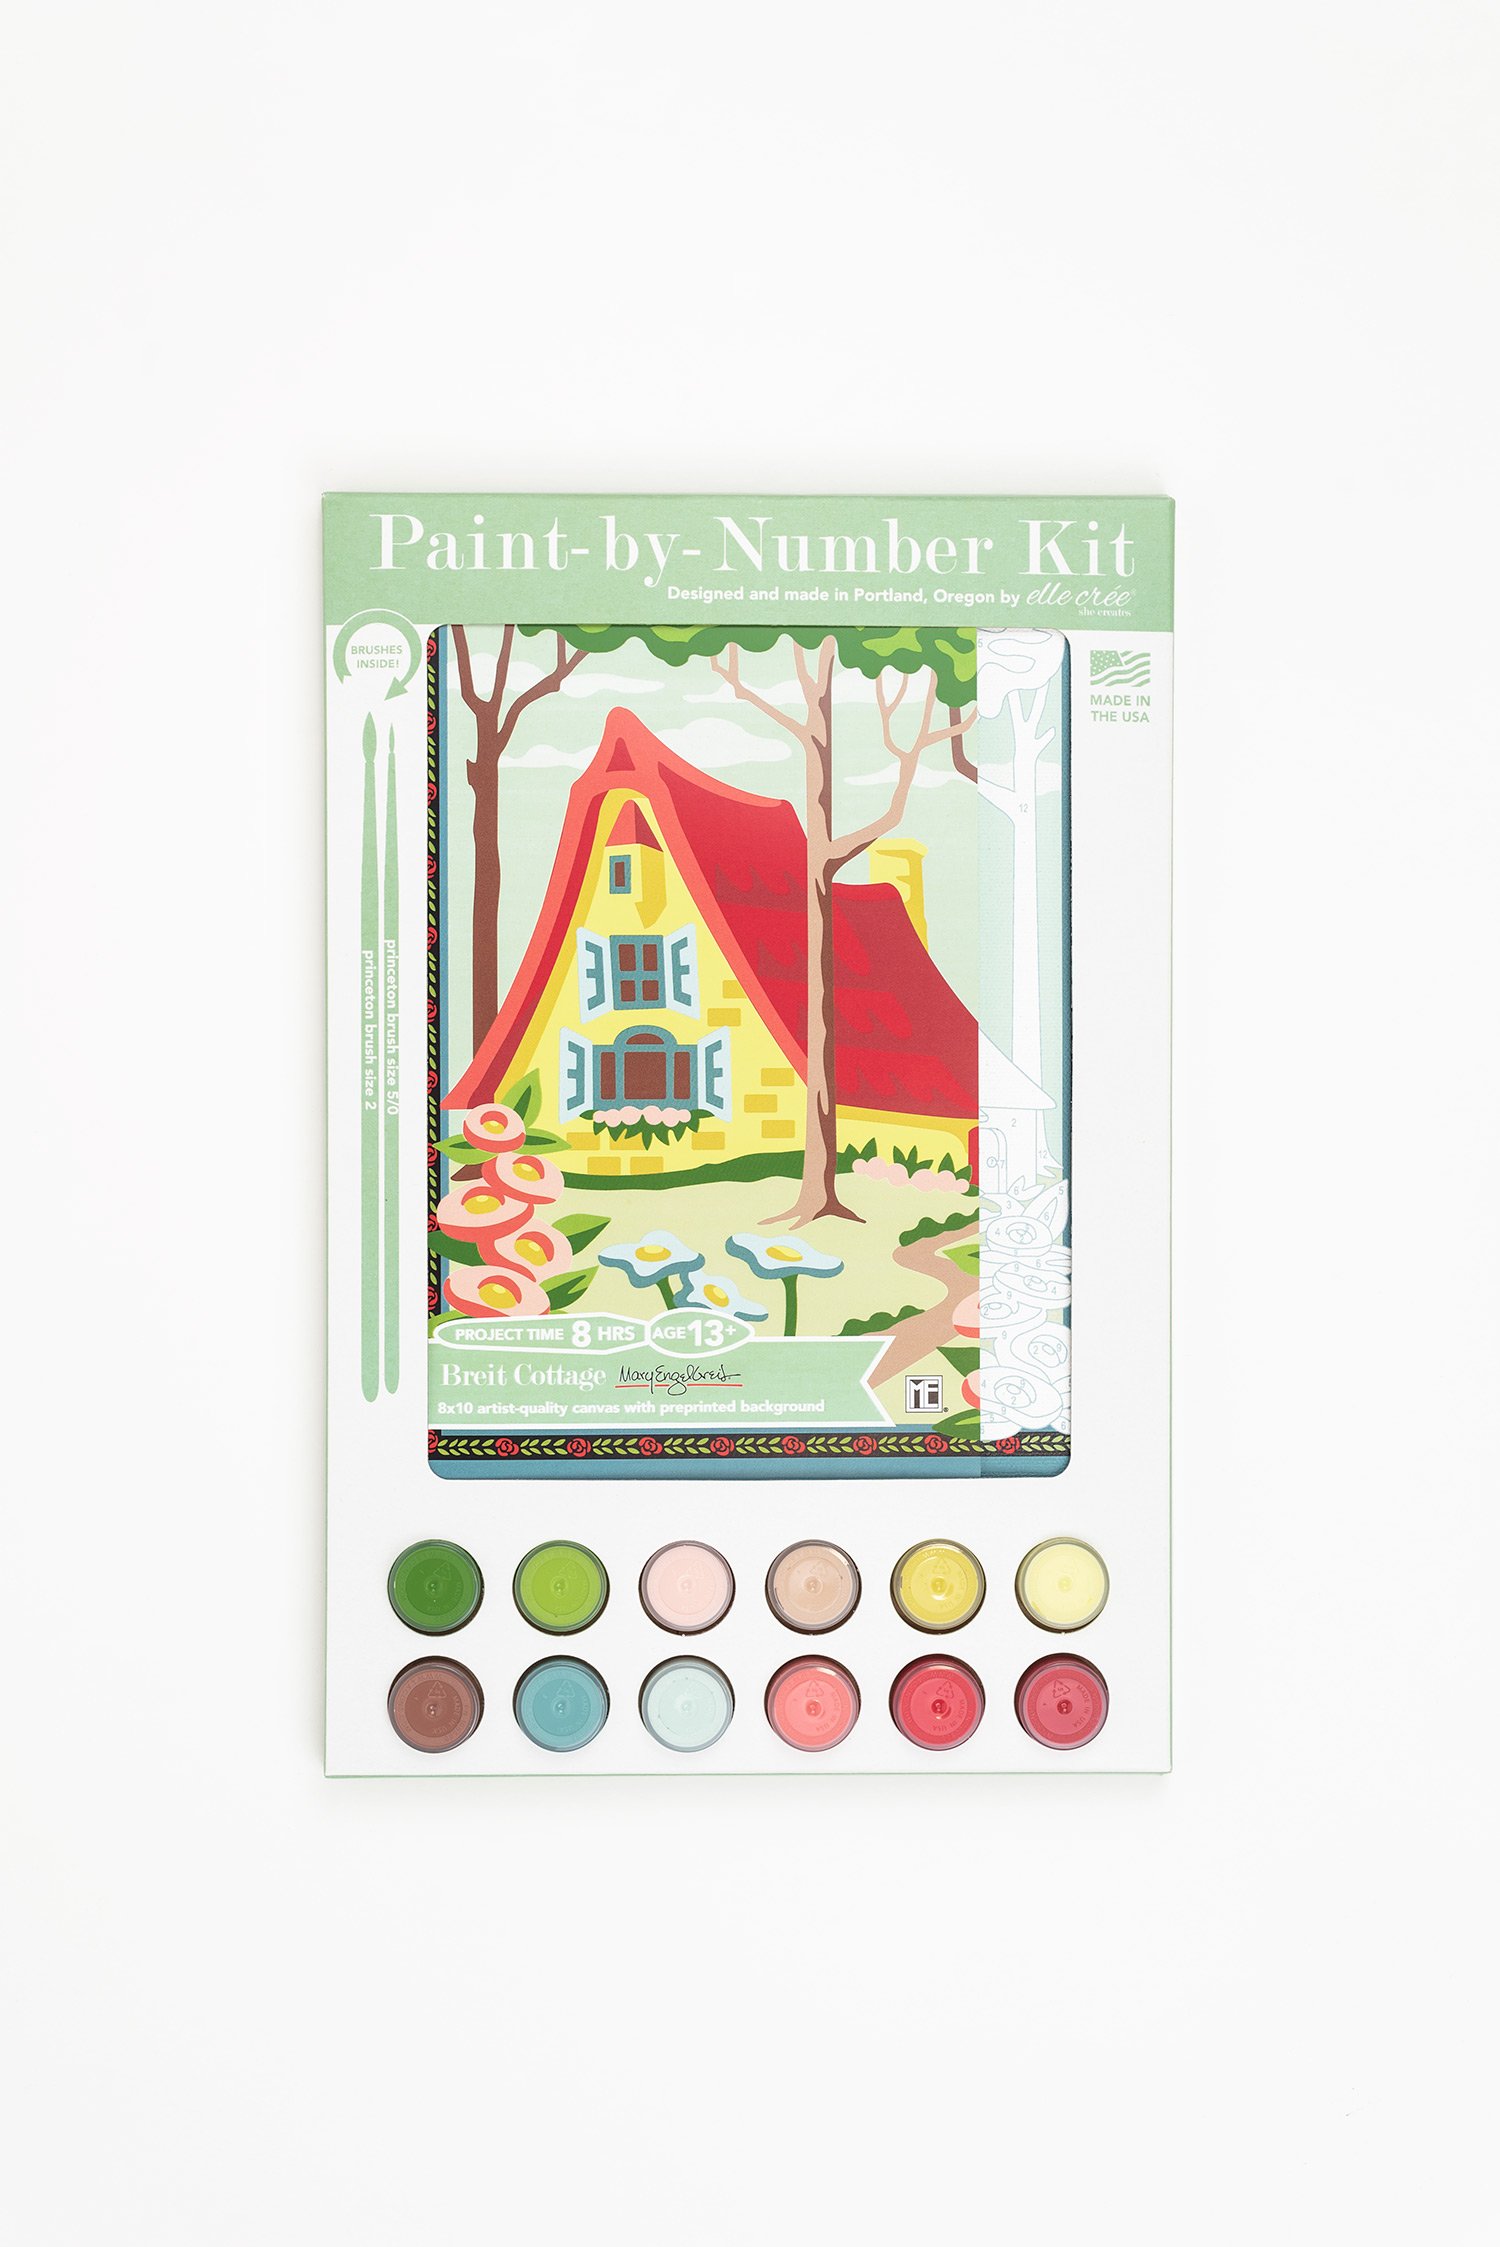 Schipper Paint by Numbers Kit - Old English Cottage 609240831 New Sealed!